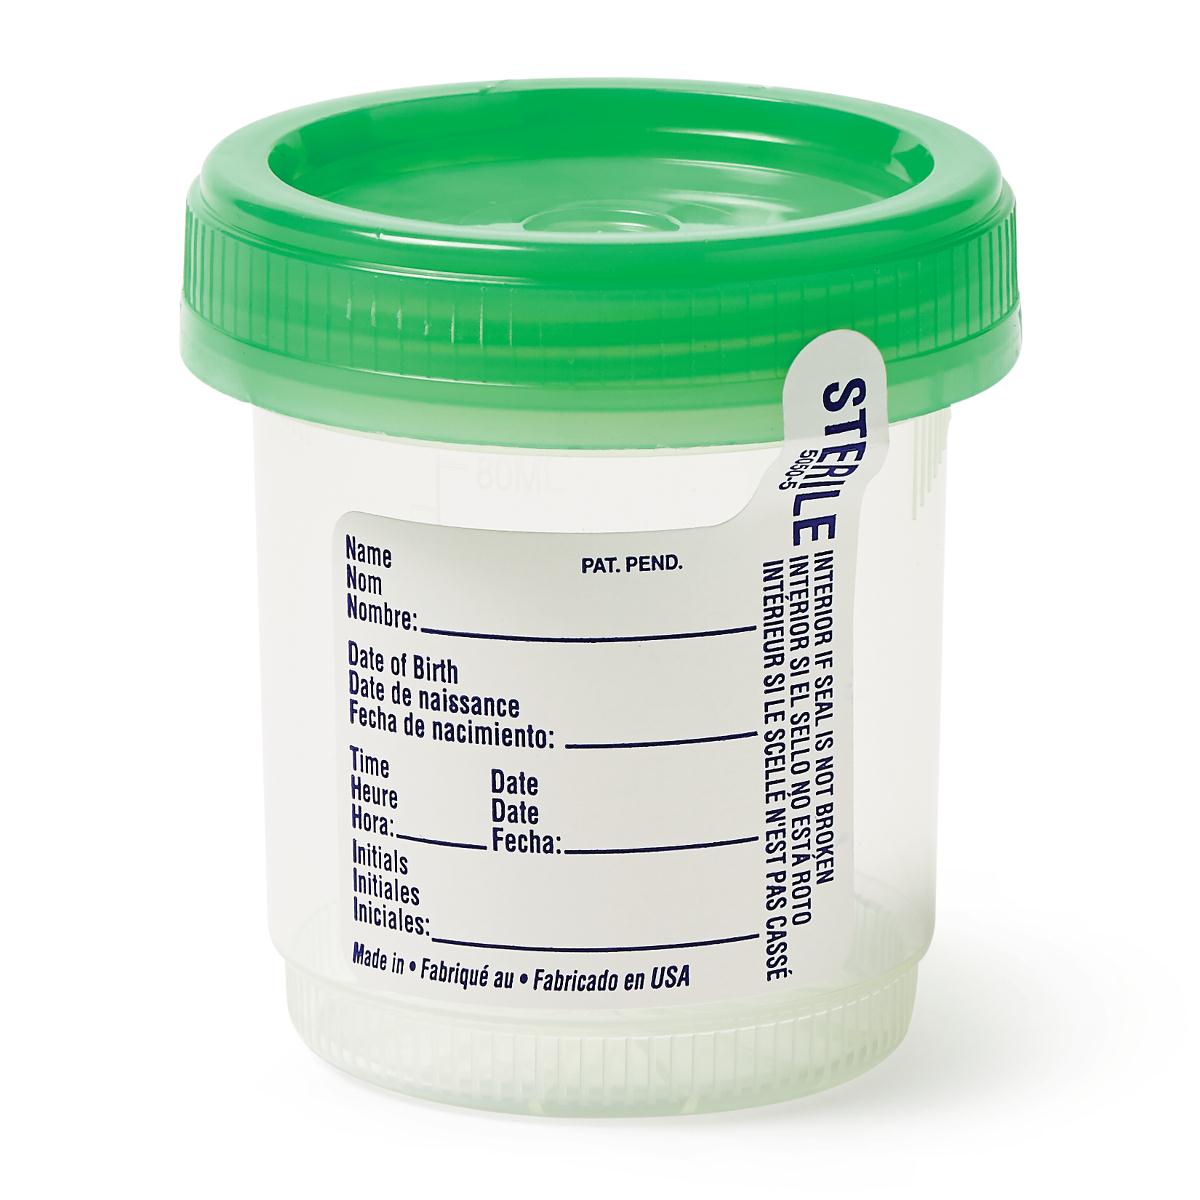 Parter Medical Products Sterile Specimen Containers:Clinical